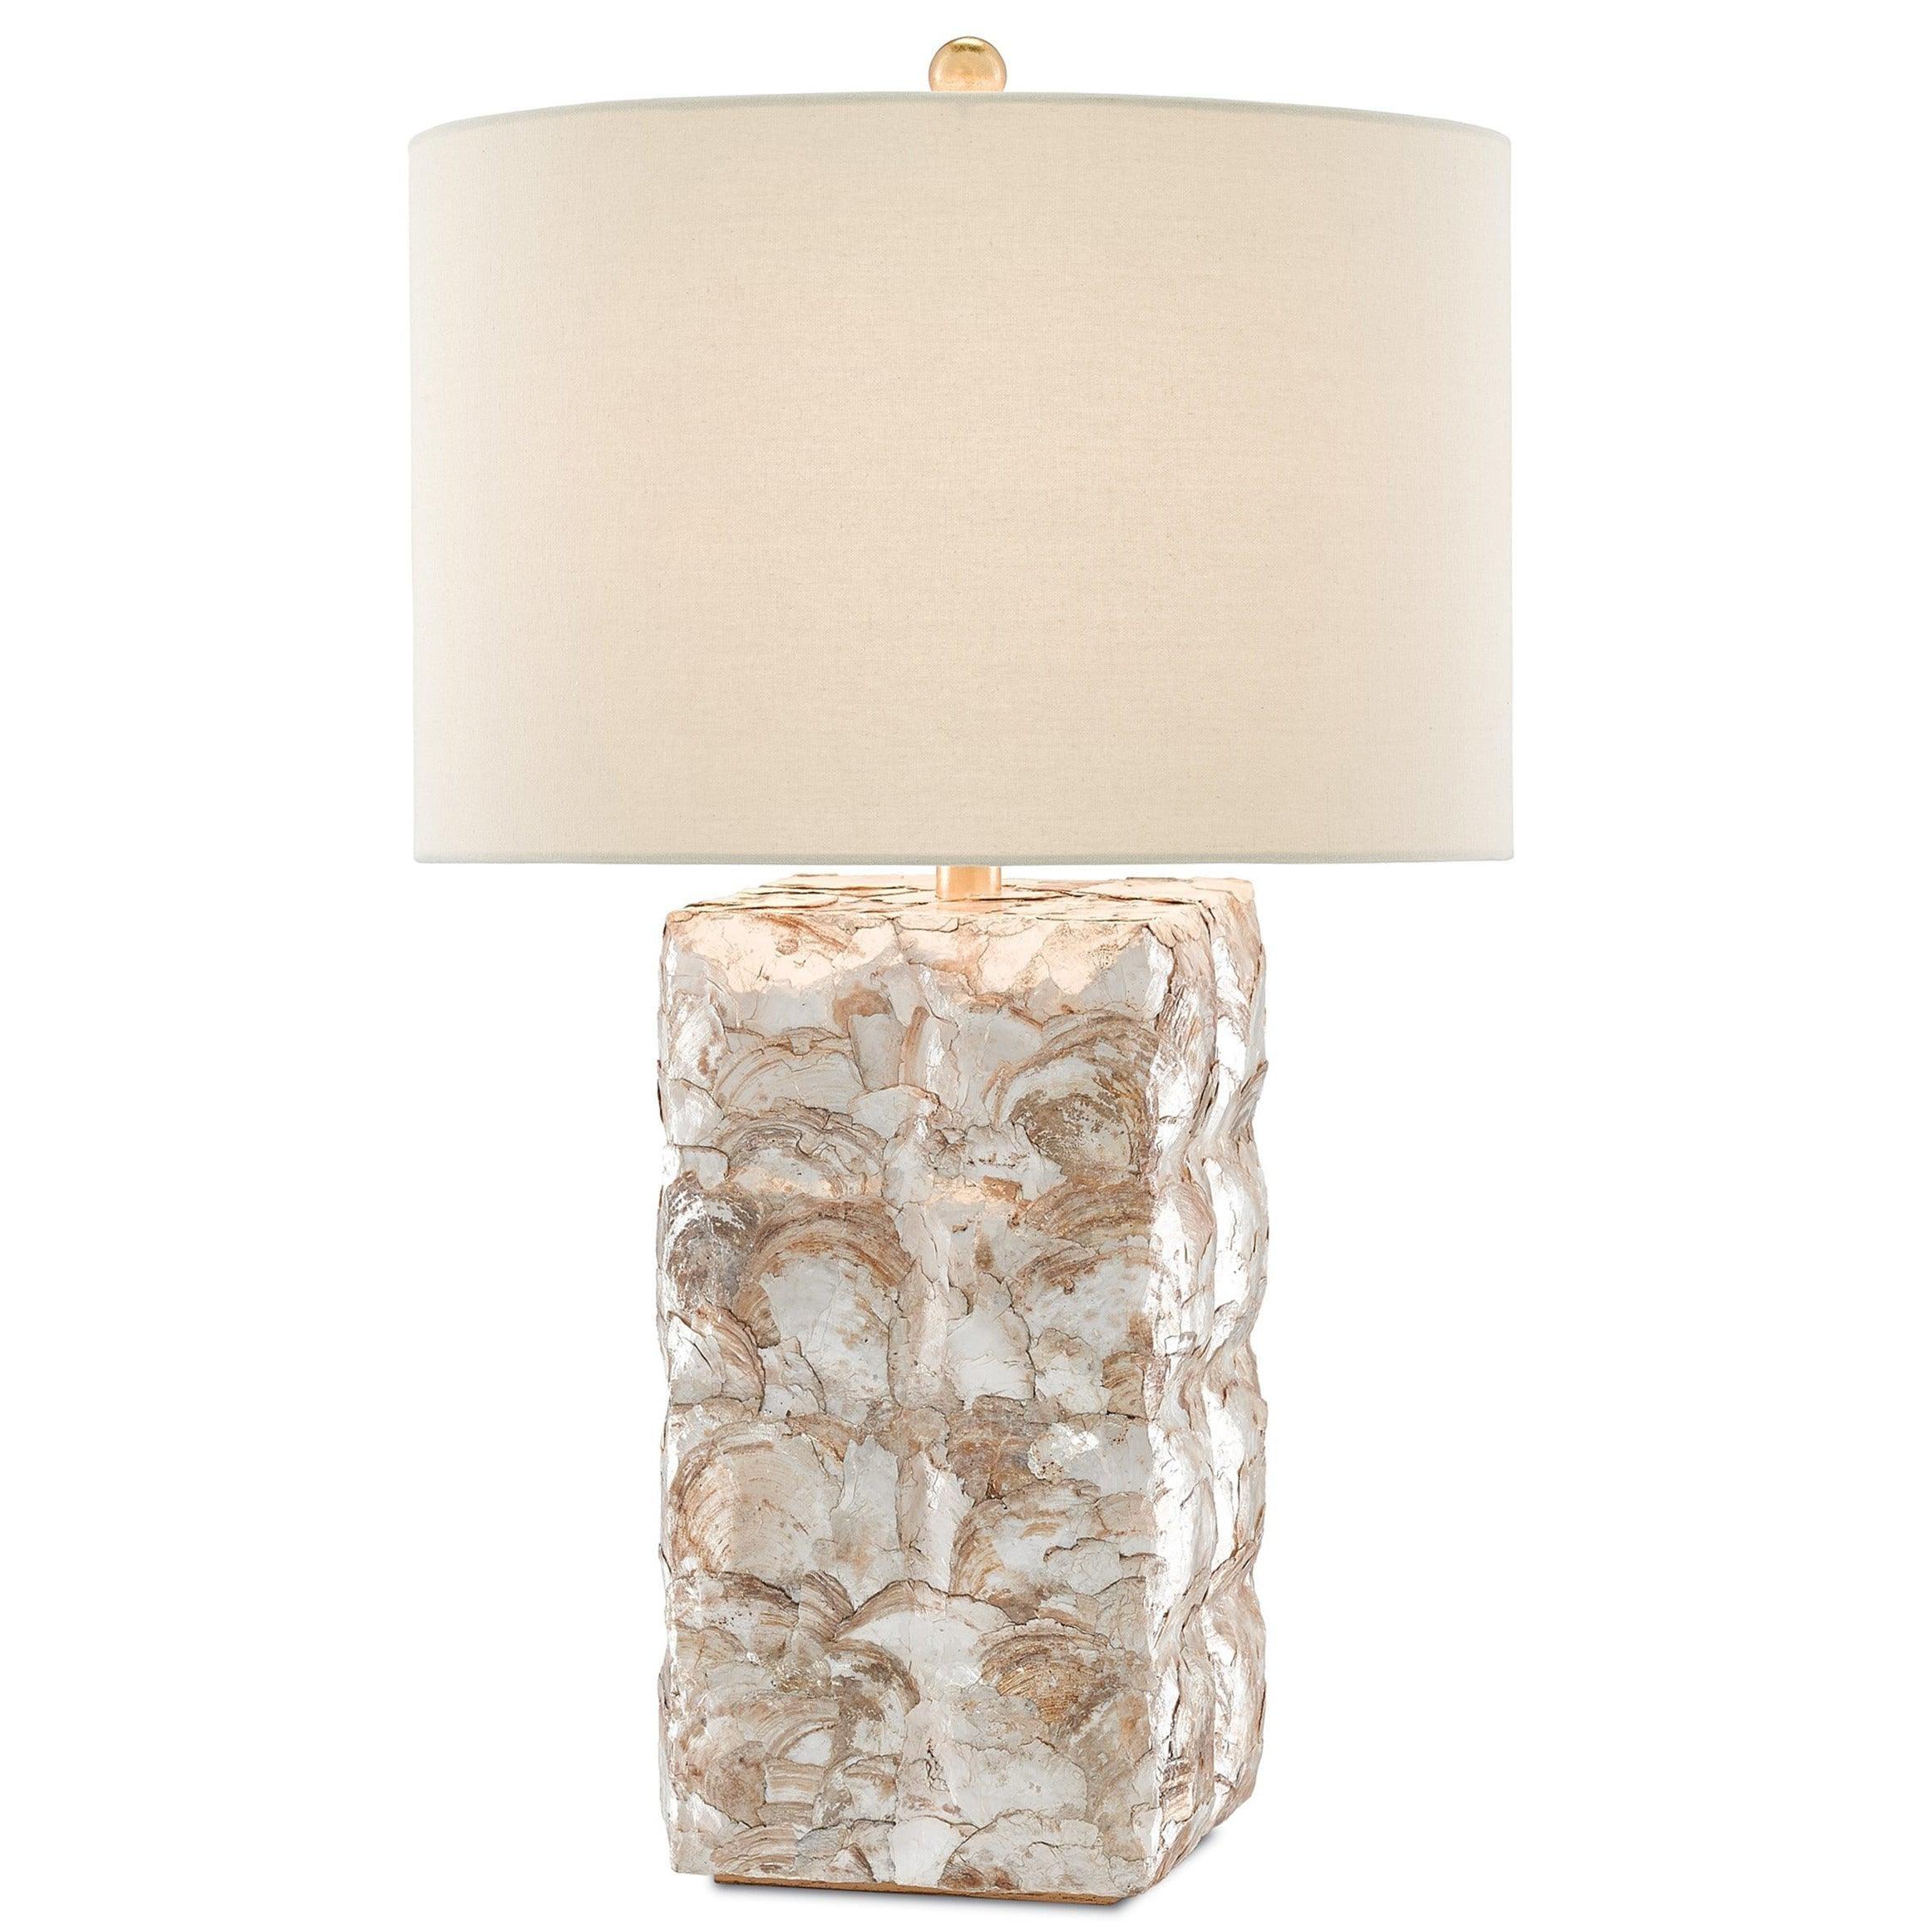 Currey and Company - La Table Lamp - 6000-0134 | Montreal Lighting & Hardware